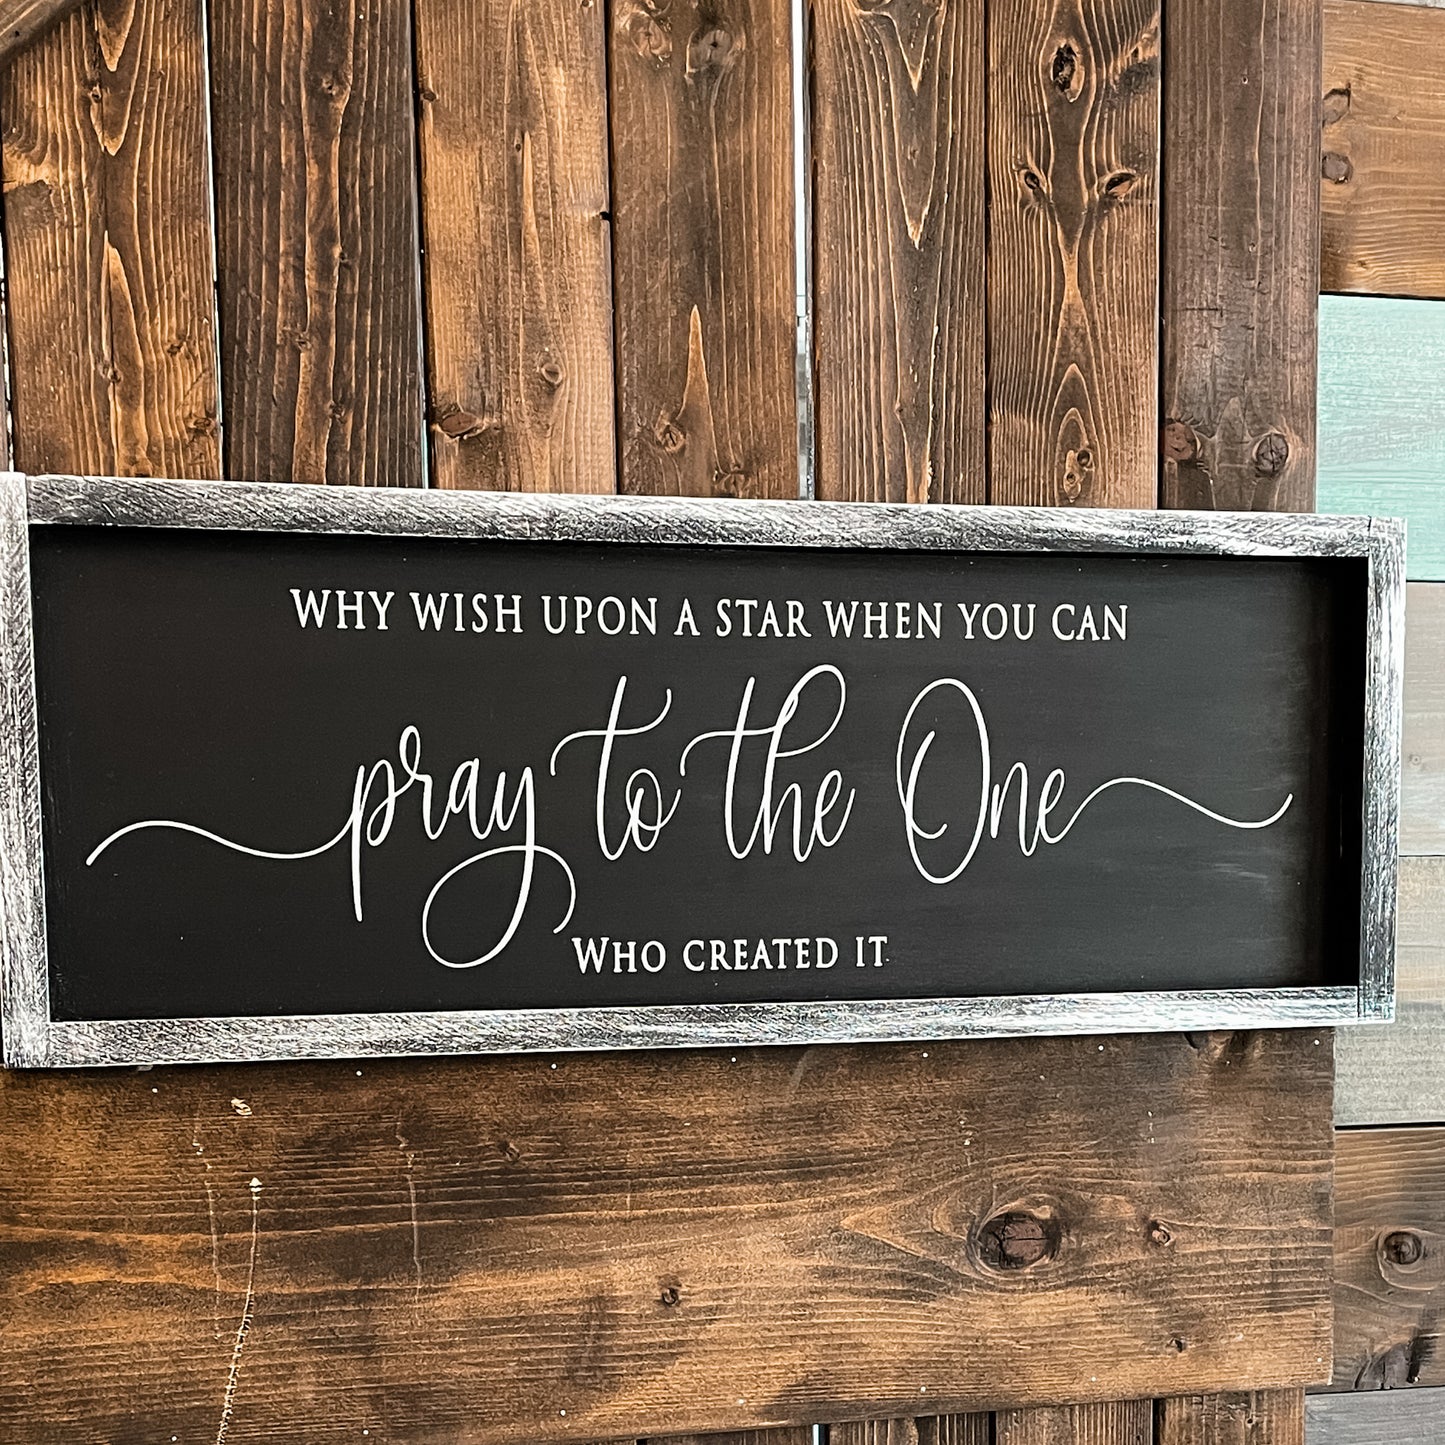 Why wish upon a star when you can Pray to the One who Created it: Plank Design - Paisley Grace Makery